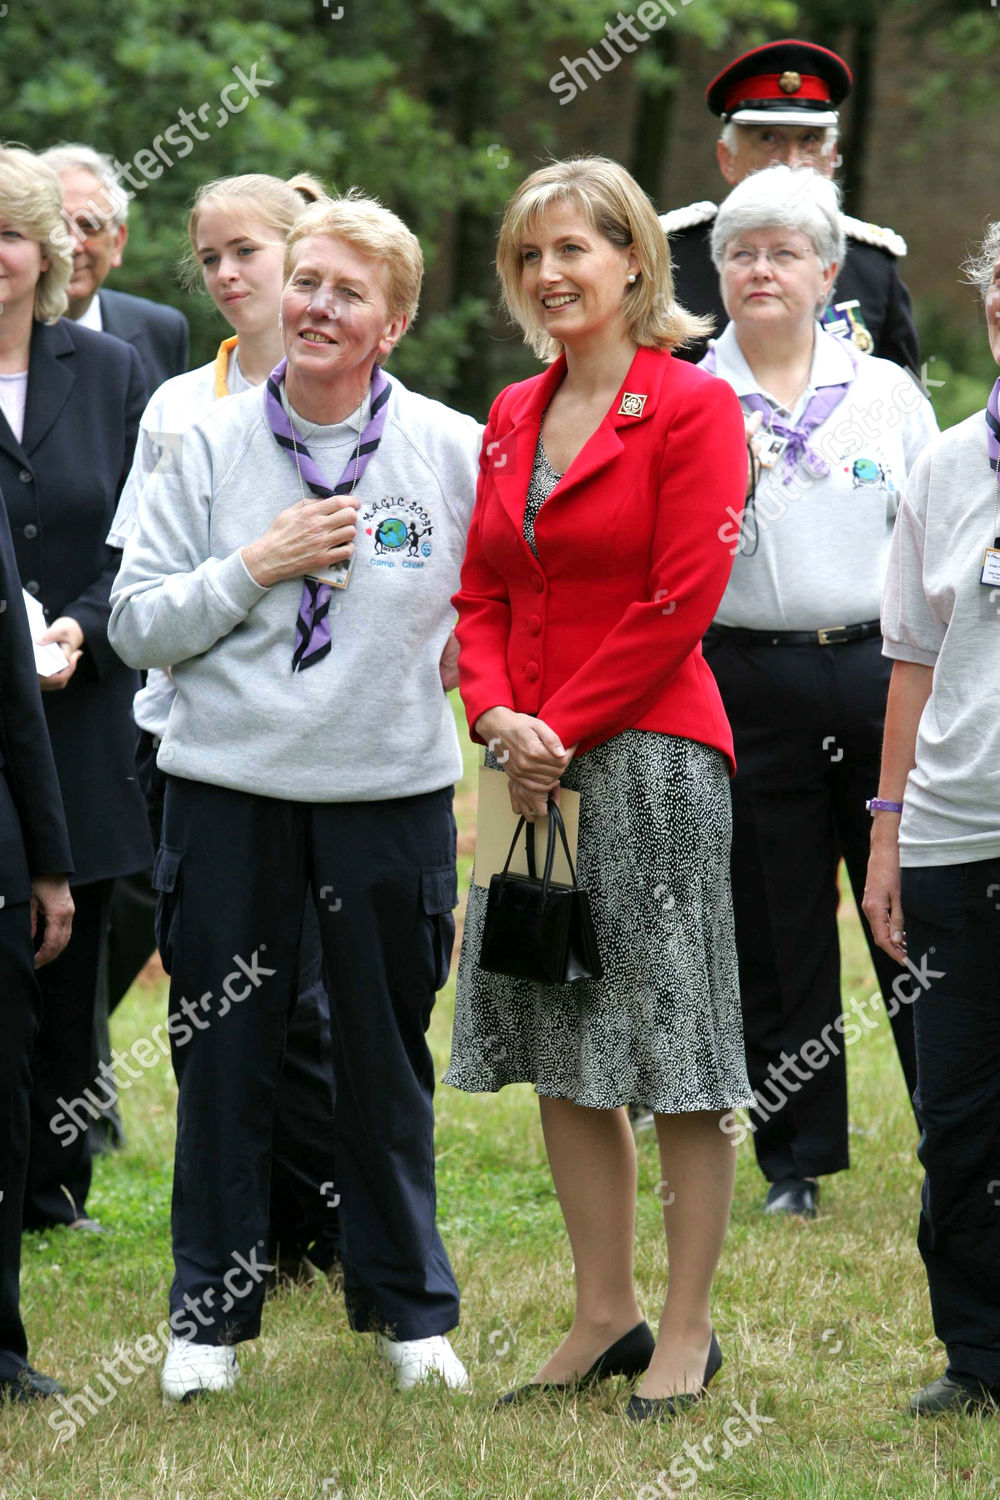 sophie-countess-of-wessex-at-the-guides-magic-camp-beaudesert-park-cannock-wood-britain-shutterstock-editorial-462008m.jpg